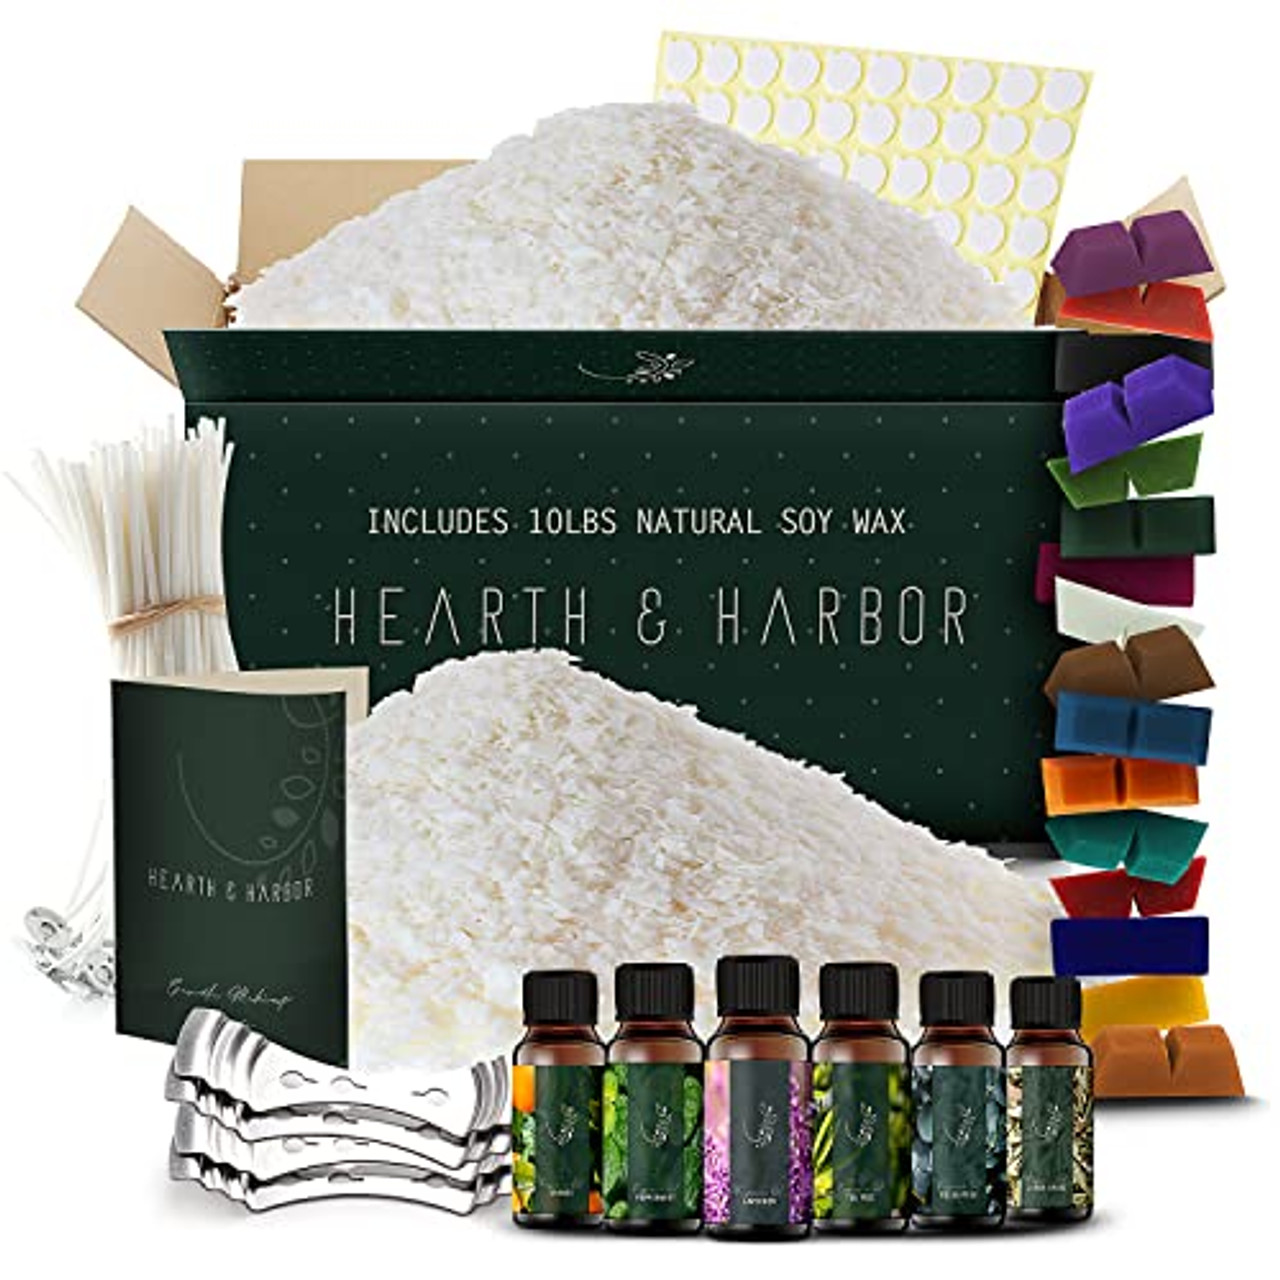 Hearth & Harbor Candle Dyes for Candle Making, Candle Color Dye for Soy Wax, 24 Candle Wax Dye Blocks, Nontoxic Candle Making Supplies for DIY